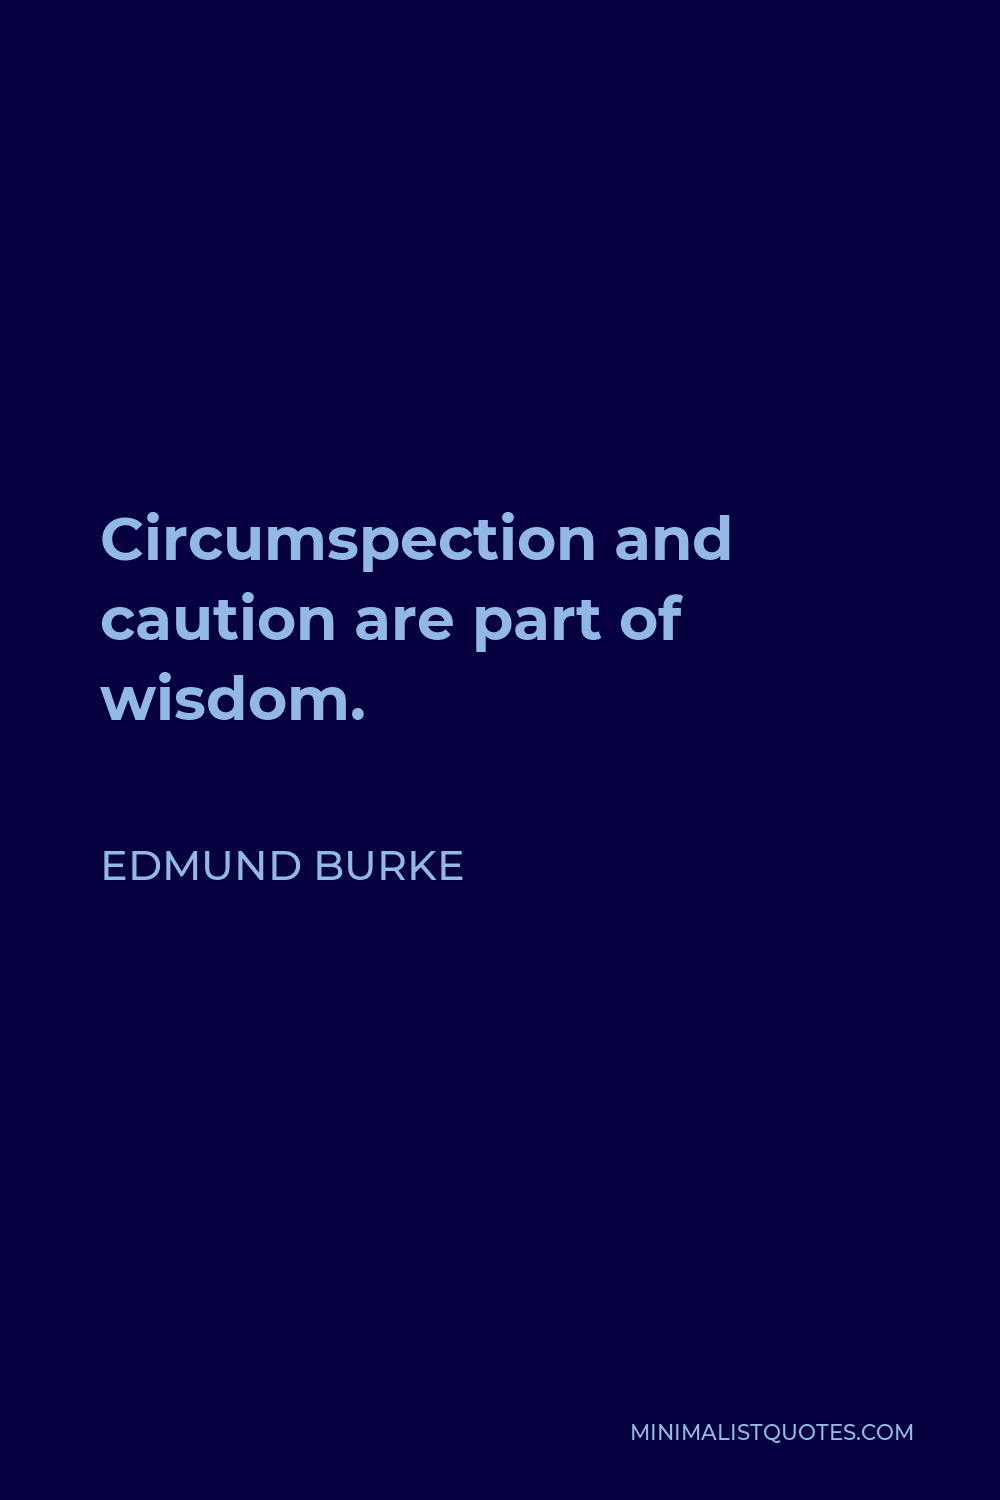 Edmund Burke Quote - Circumspection and caution are part of wisdom.